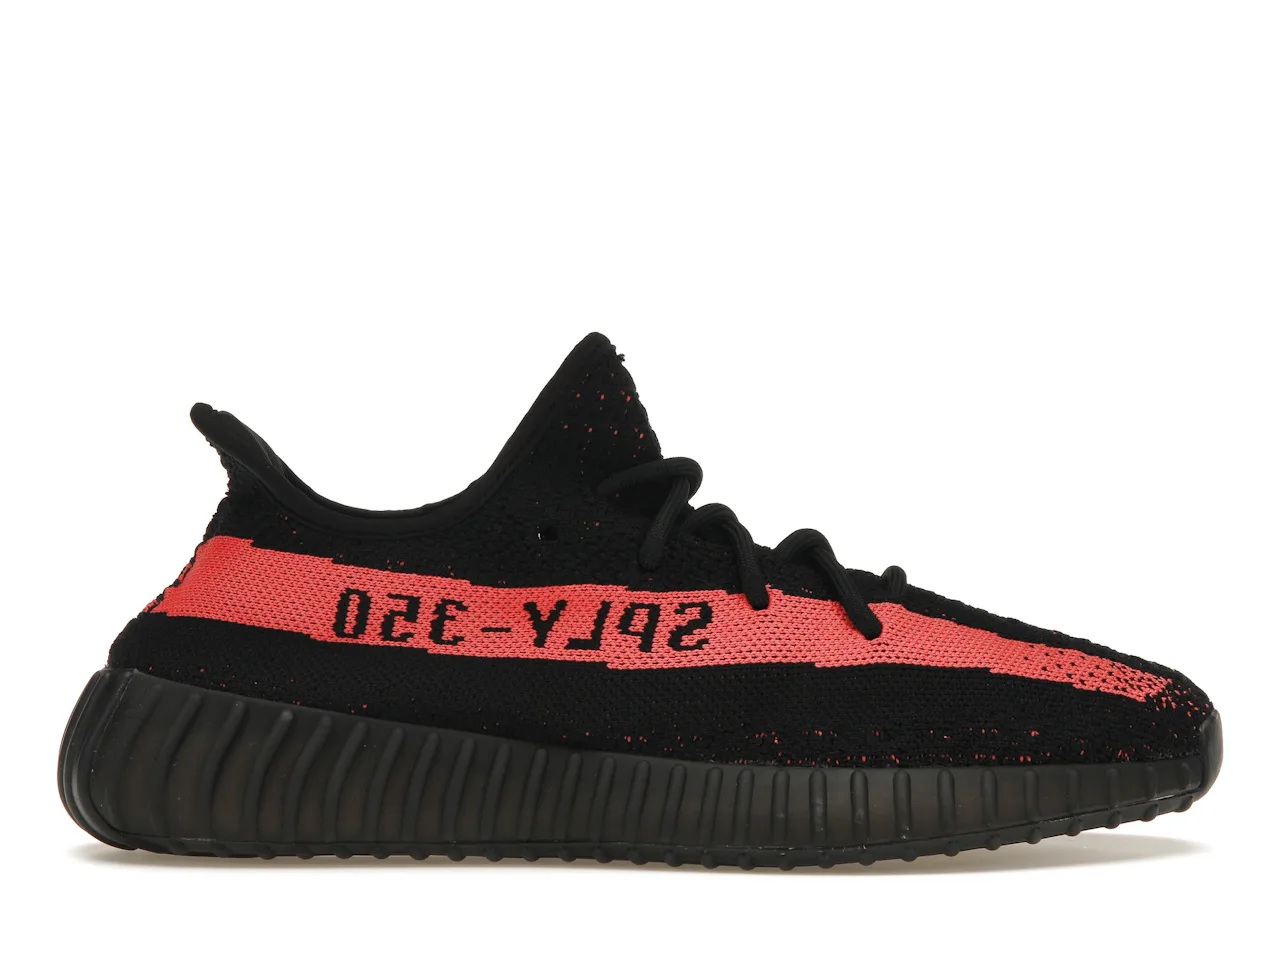 adidas Yeezy Boost 350 V2 Core Black Red (2016/2022) - BY9612